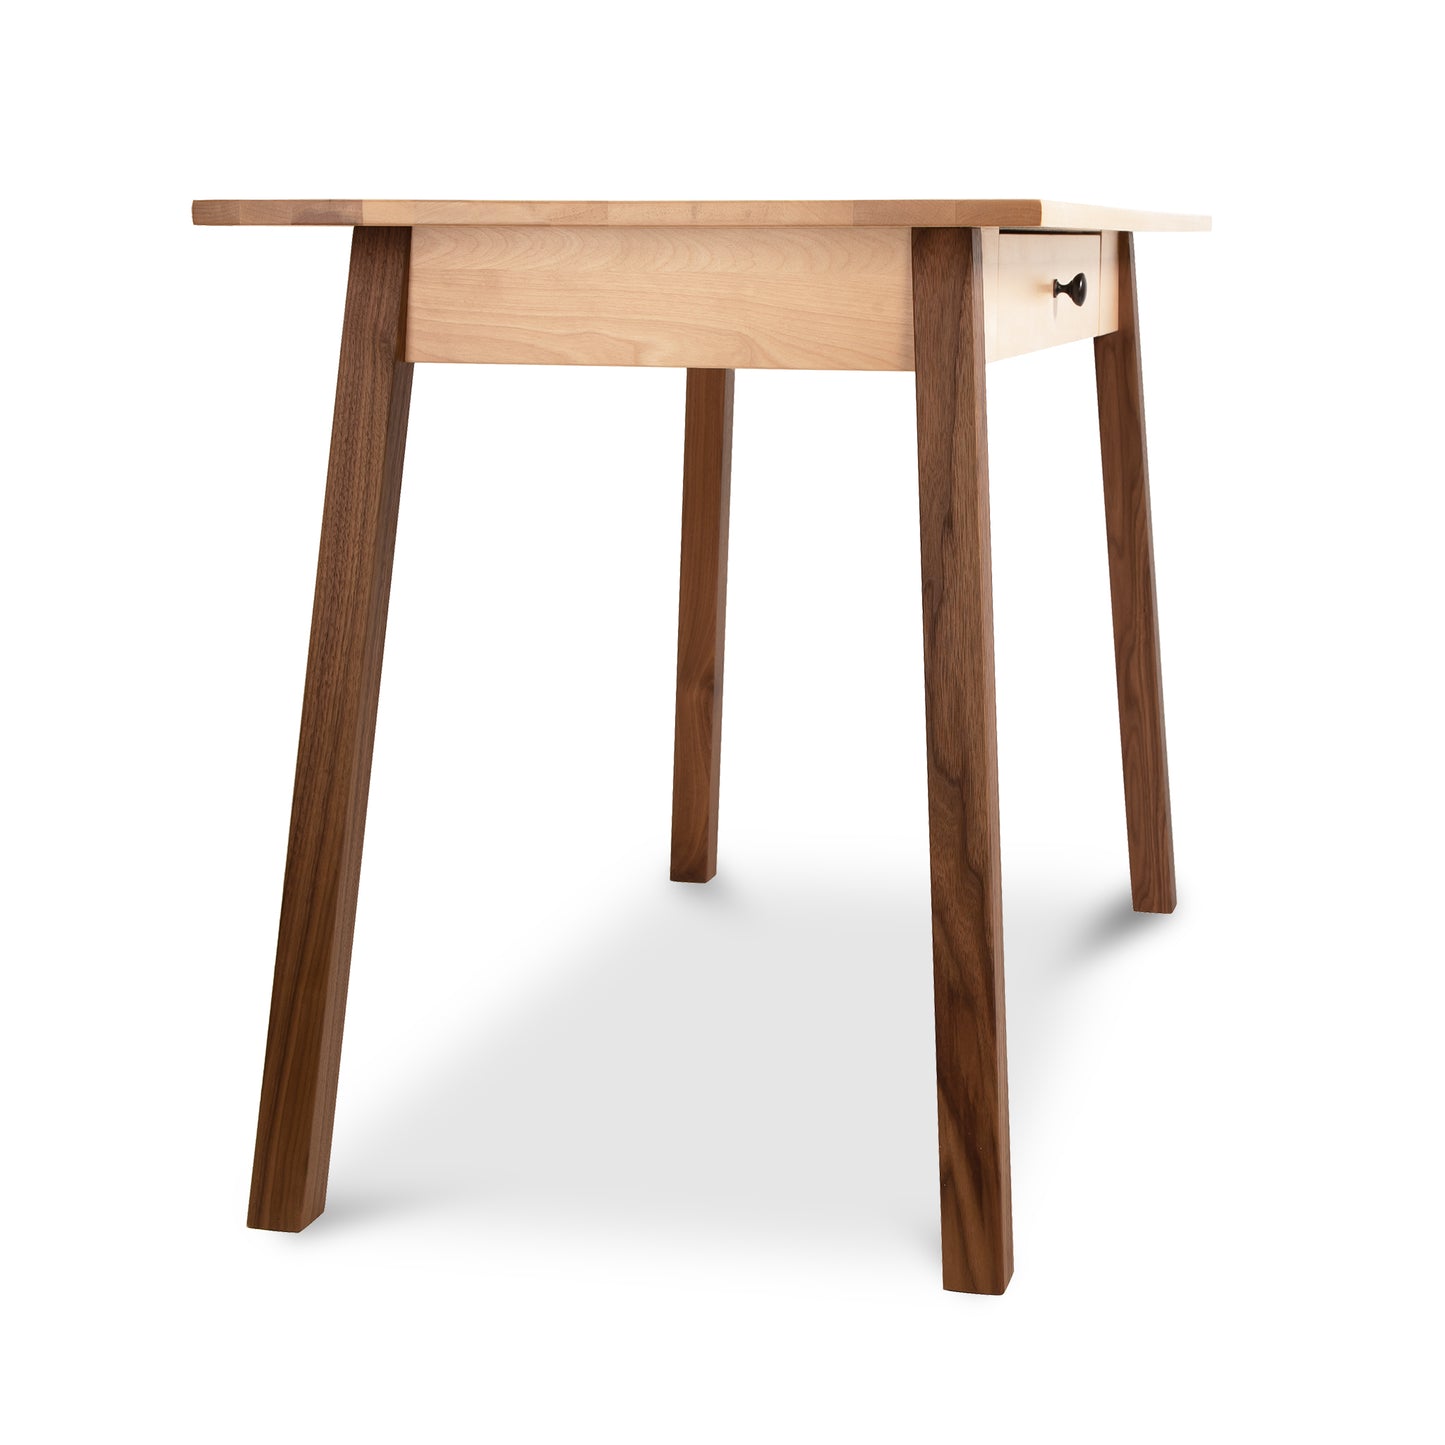 A Manchester Two-Tone Writing Desk, crafted from sustainable solid wood, with a light-colored tabletop and four dark brown legs, isolated on a white background. The desk design includes a small, visible drawer with a knob. Brand: Vermont Woods Studios